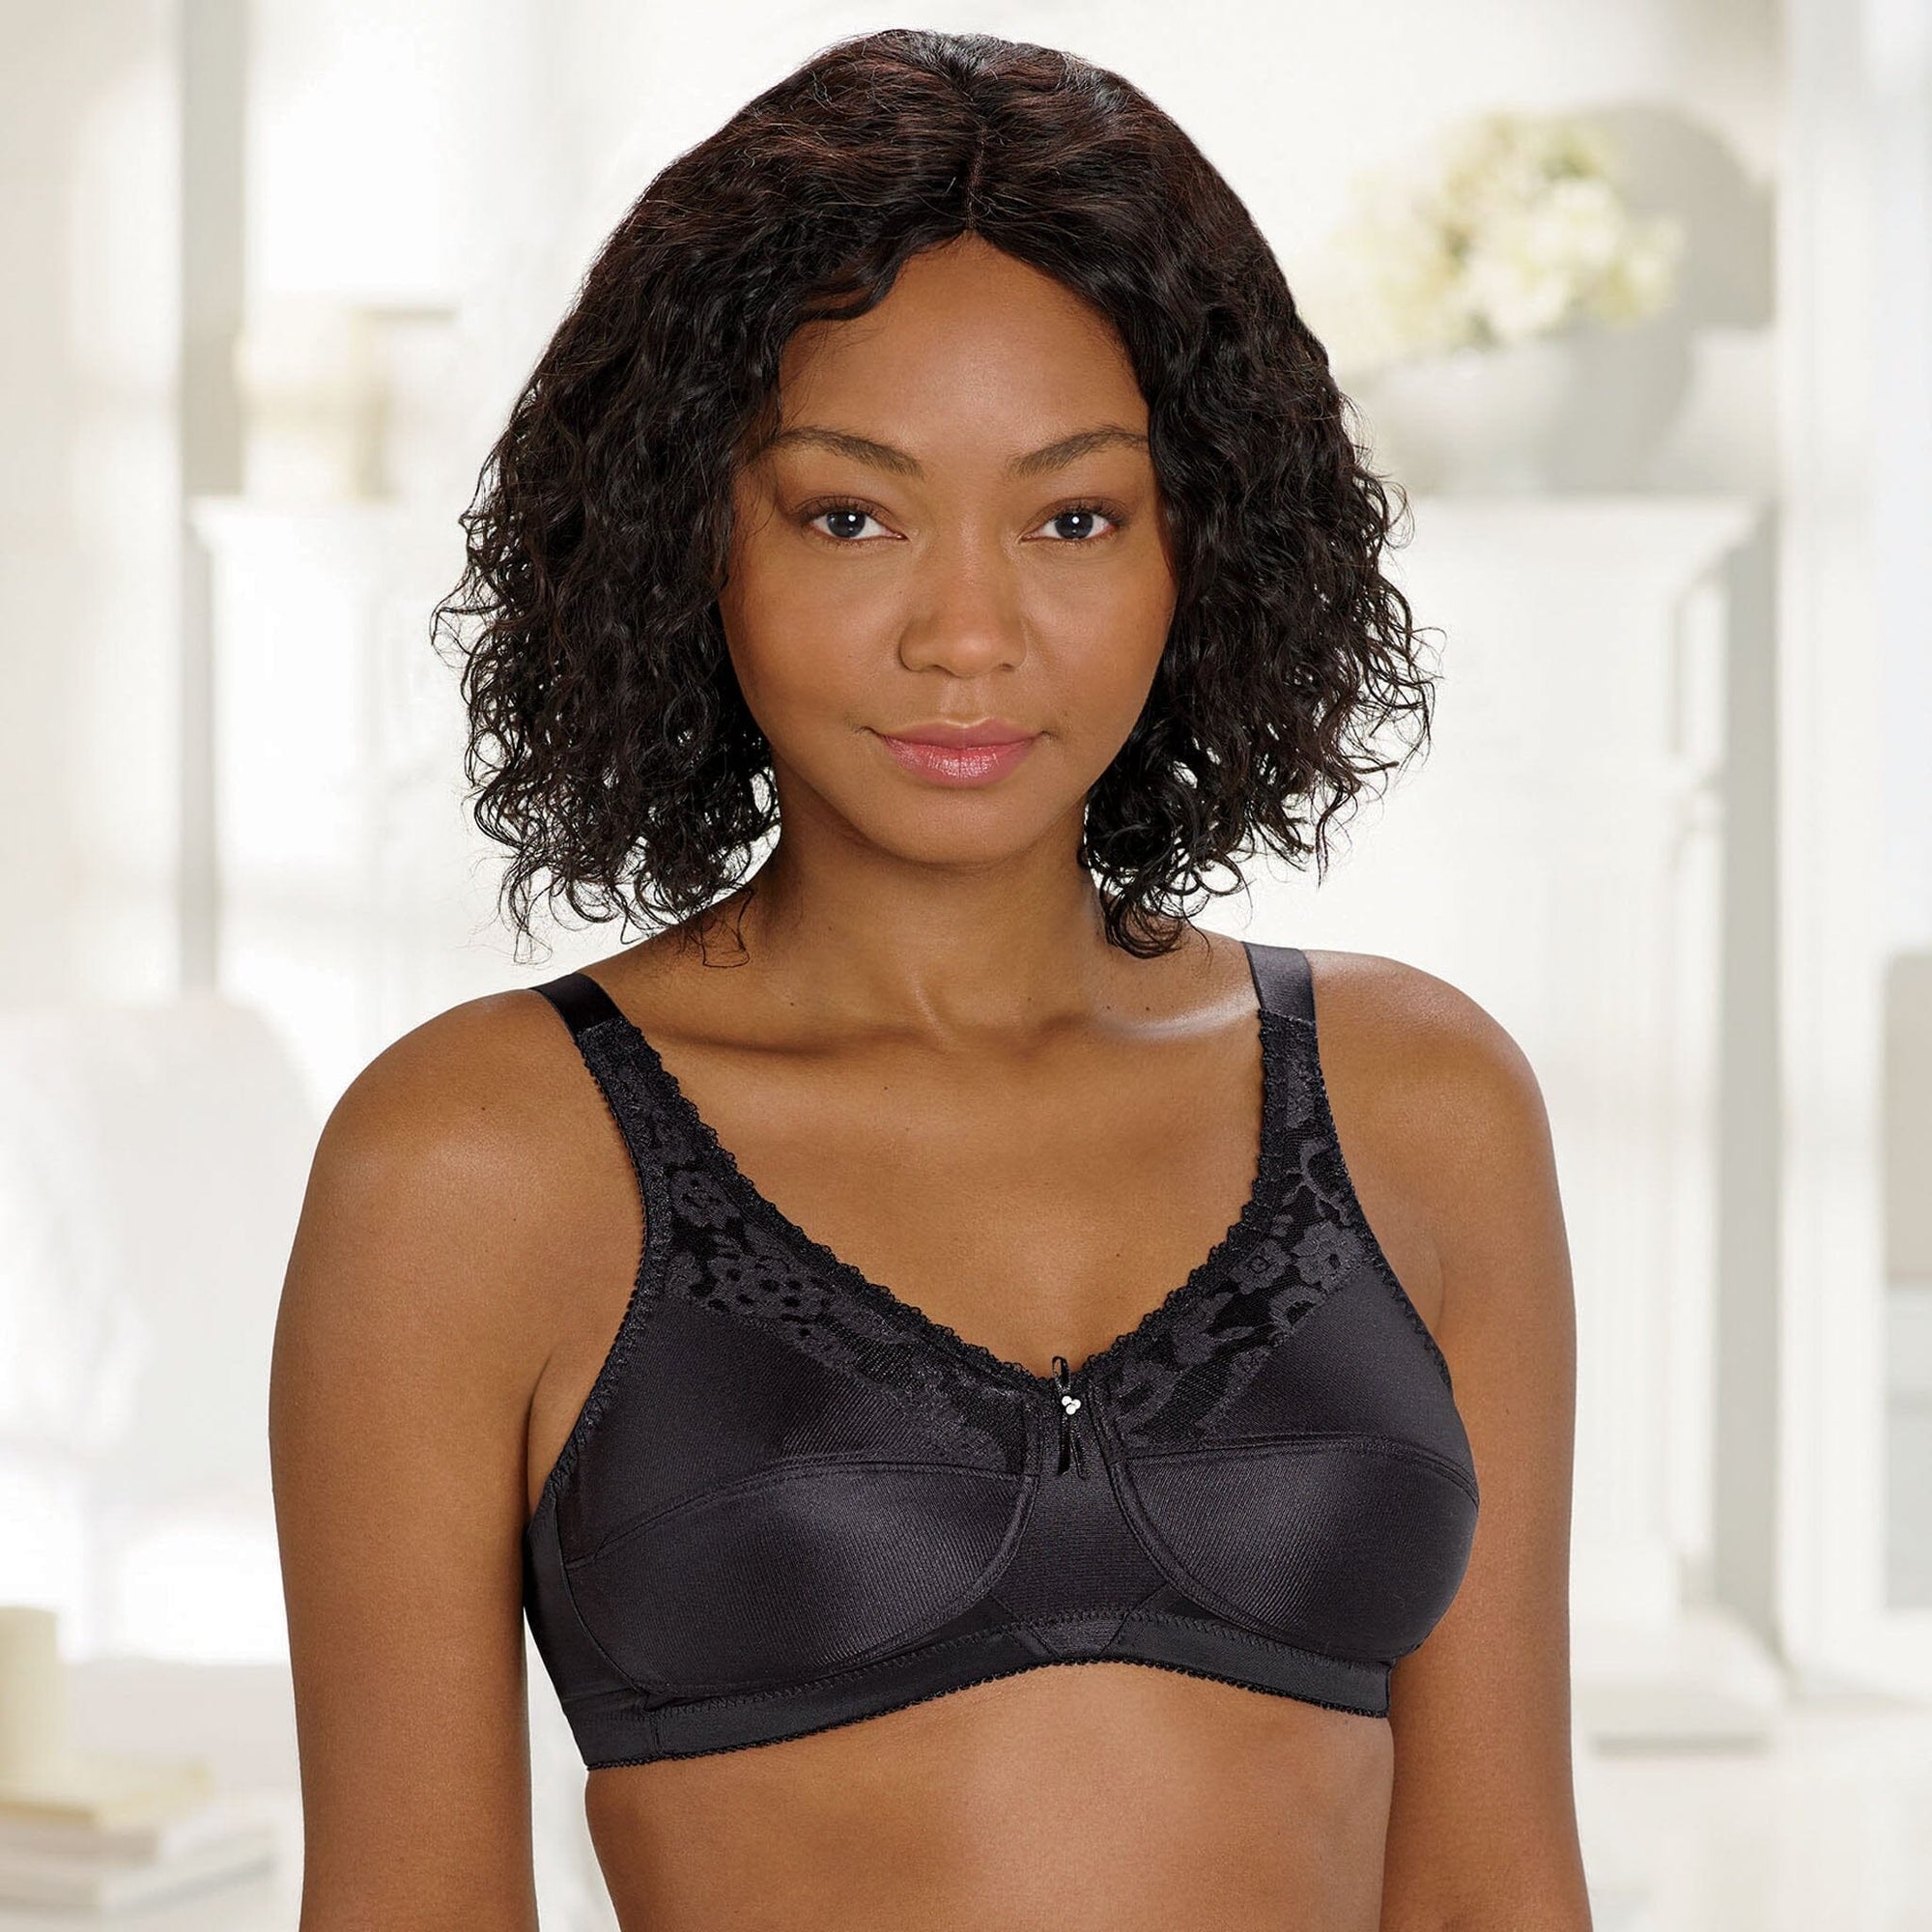 Custom Mastectomy Bras with Built-In Forms - TLC Direct Page 2